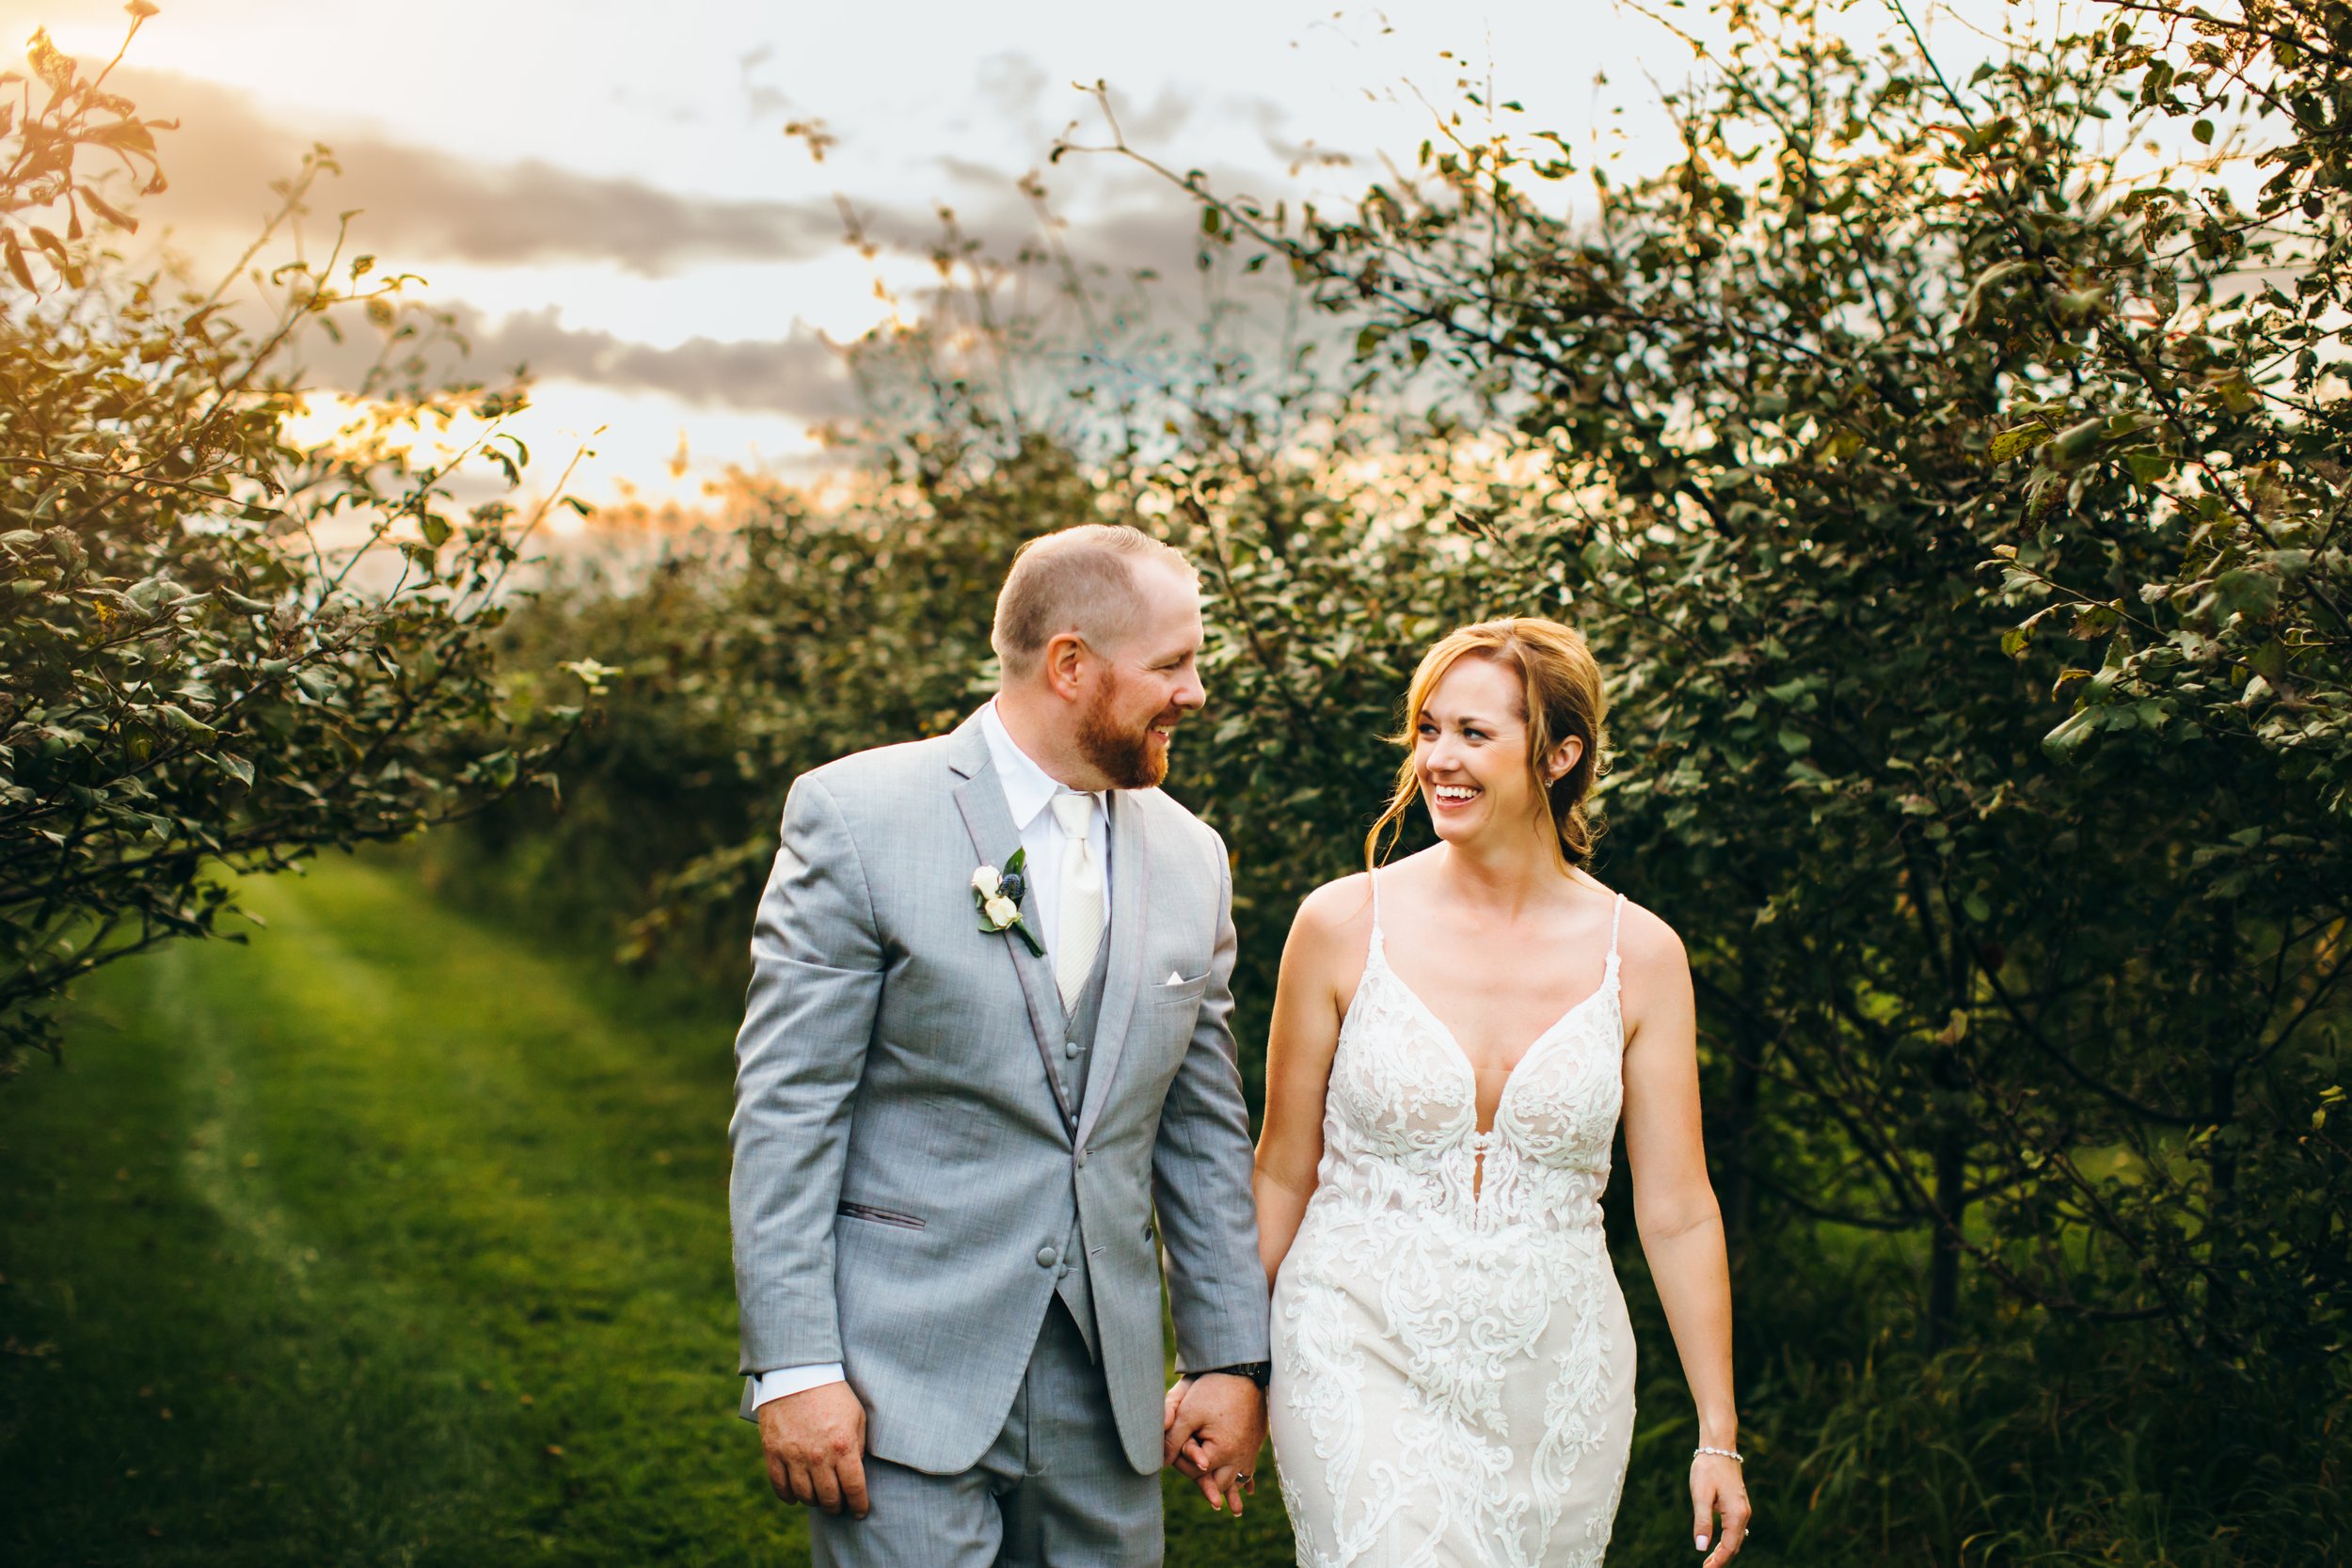  Bride and groom walking in an orchard at sunset by Teala Ward Photography. dynamic wedding shots sunset wedding gray suit summer wedding #TealaWardPhotography #IllinoisValleyPhotographer #summerwedding #TealaWardWeddings #Illinoisweddings  